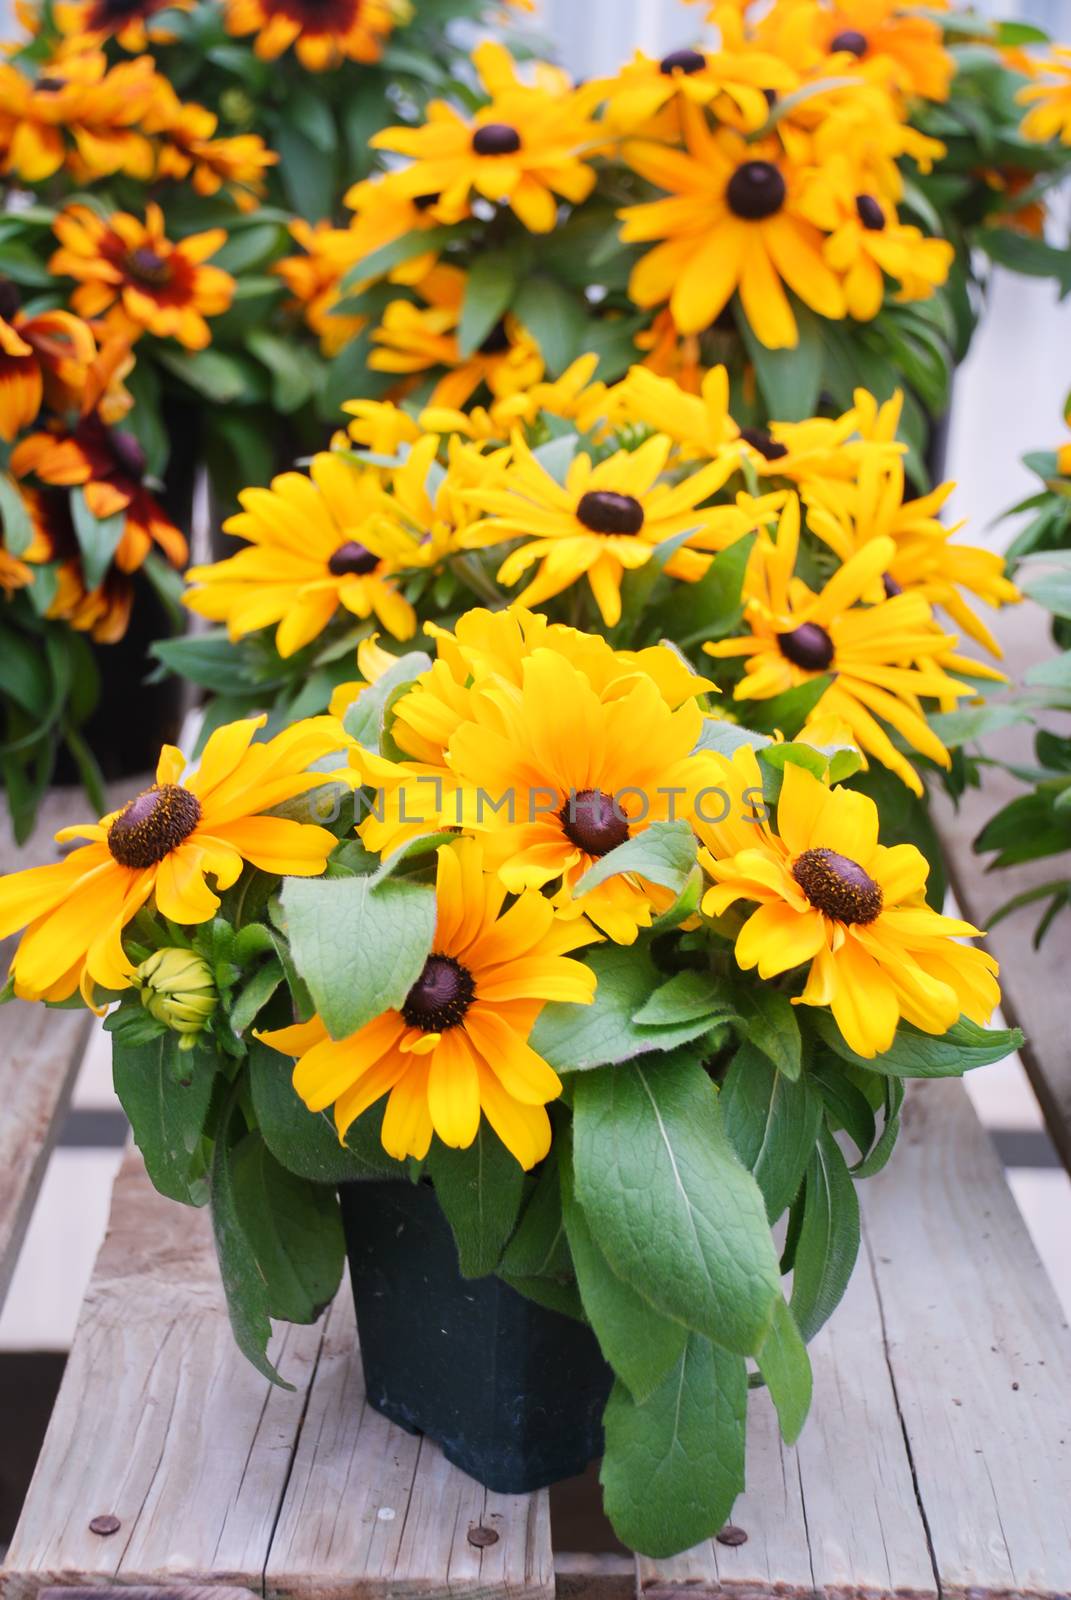 Yellow black-eyed susans, Rudbeckia hirta, flowering in a summer by yuiyuize